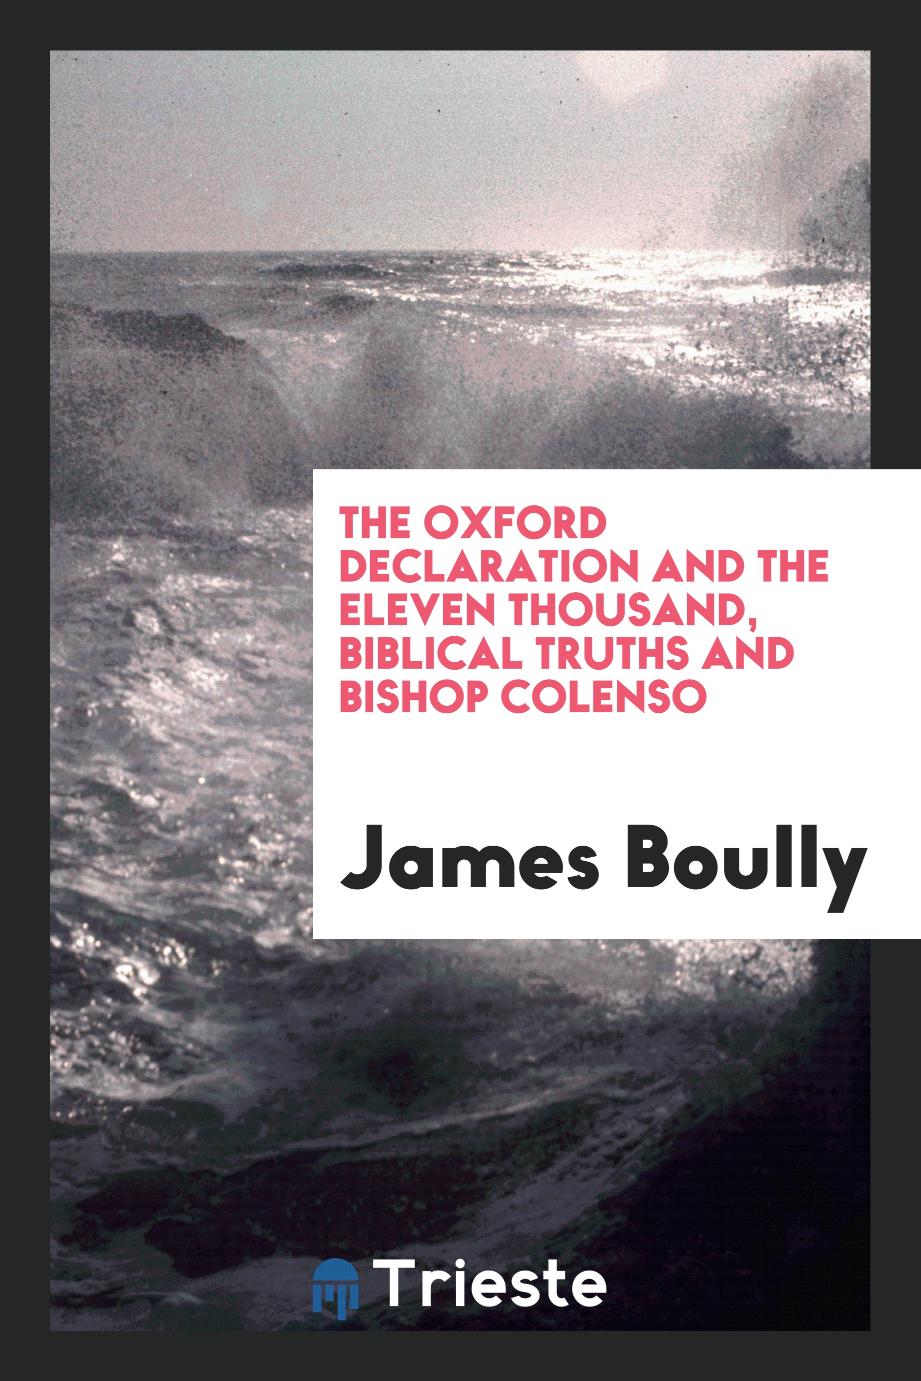 The Oxford Declaration and the Eleven Thousand, Biblical Truths and Bishop Colenso